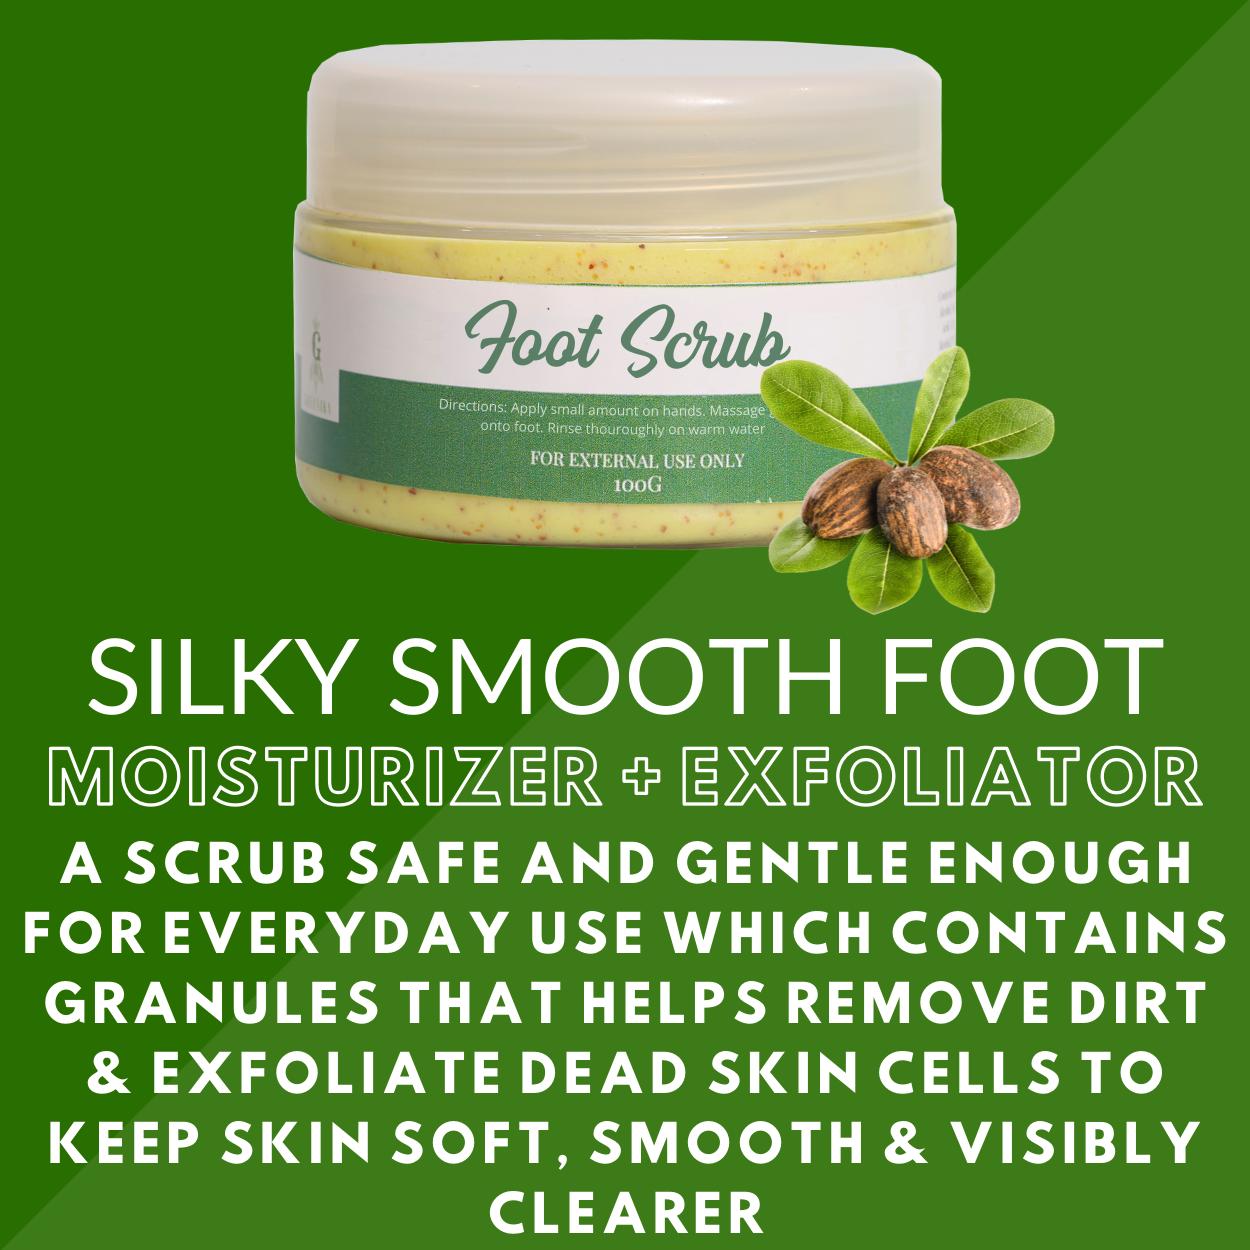 [ MOISTURIZER + WHITENING ] Greenika Foot Scrub for Smoother Soft Silky Clearer Foot Removes Dead Skin Cells Spa at Home Skin Care Product Removes Calluses Cracked Heel Foot Soak Moisturizes Best Looking Organic